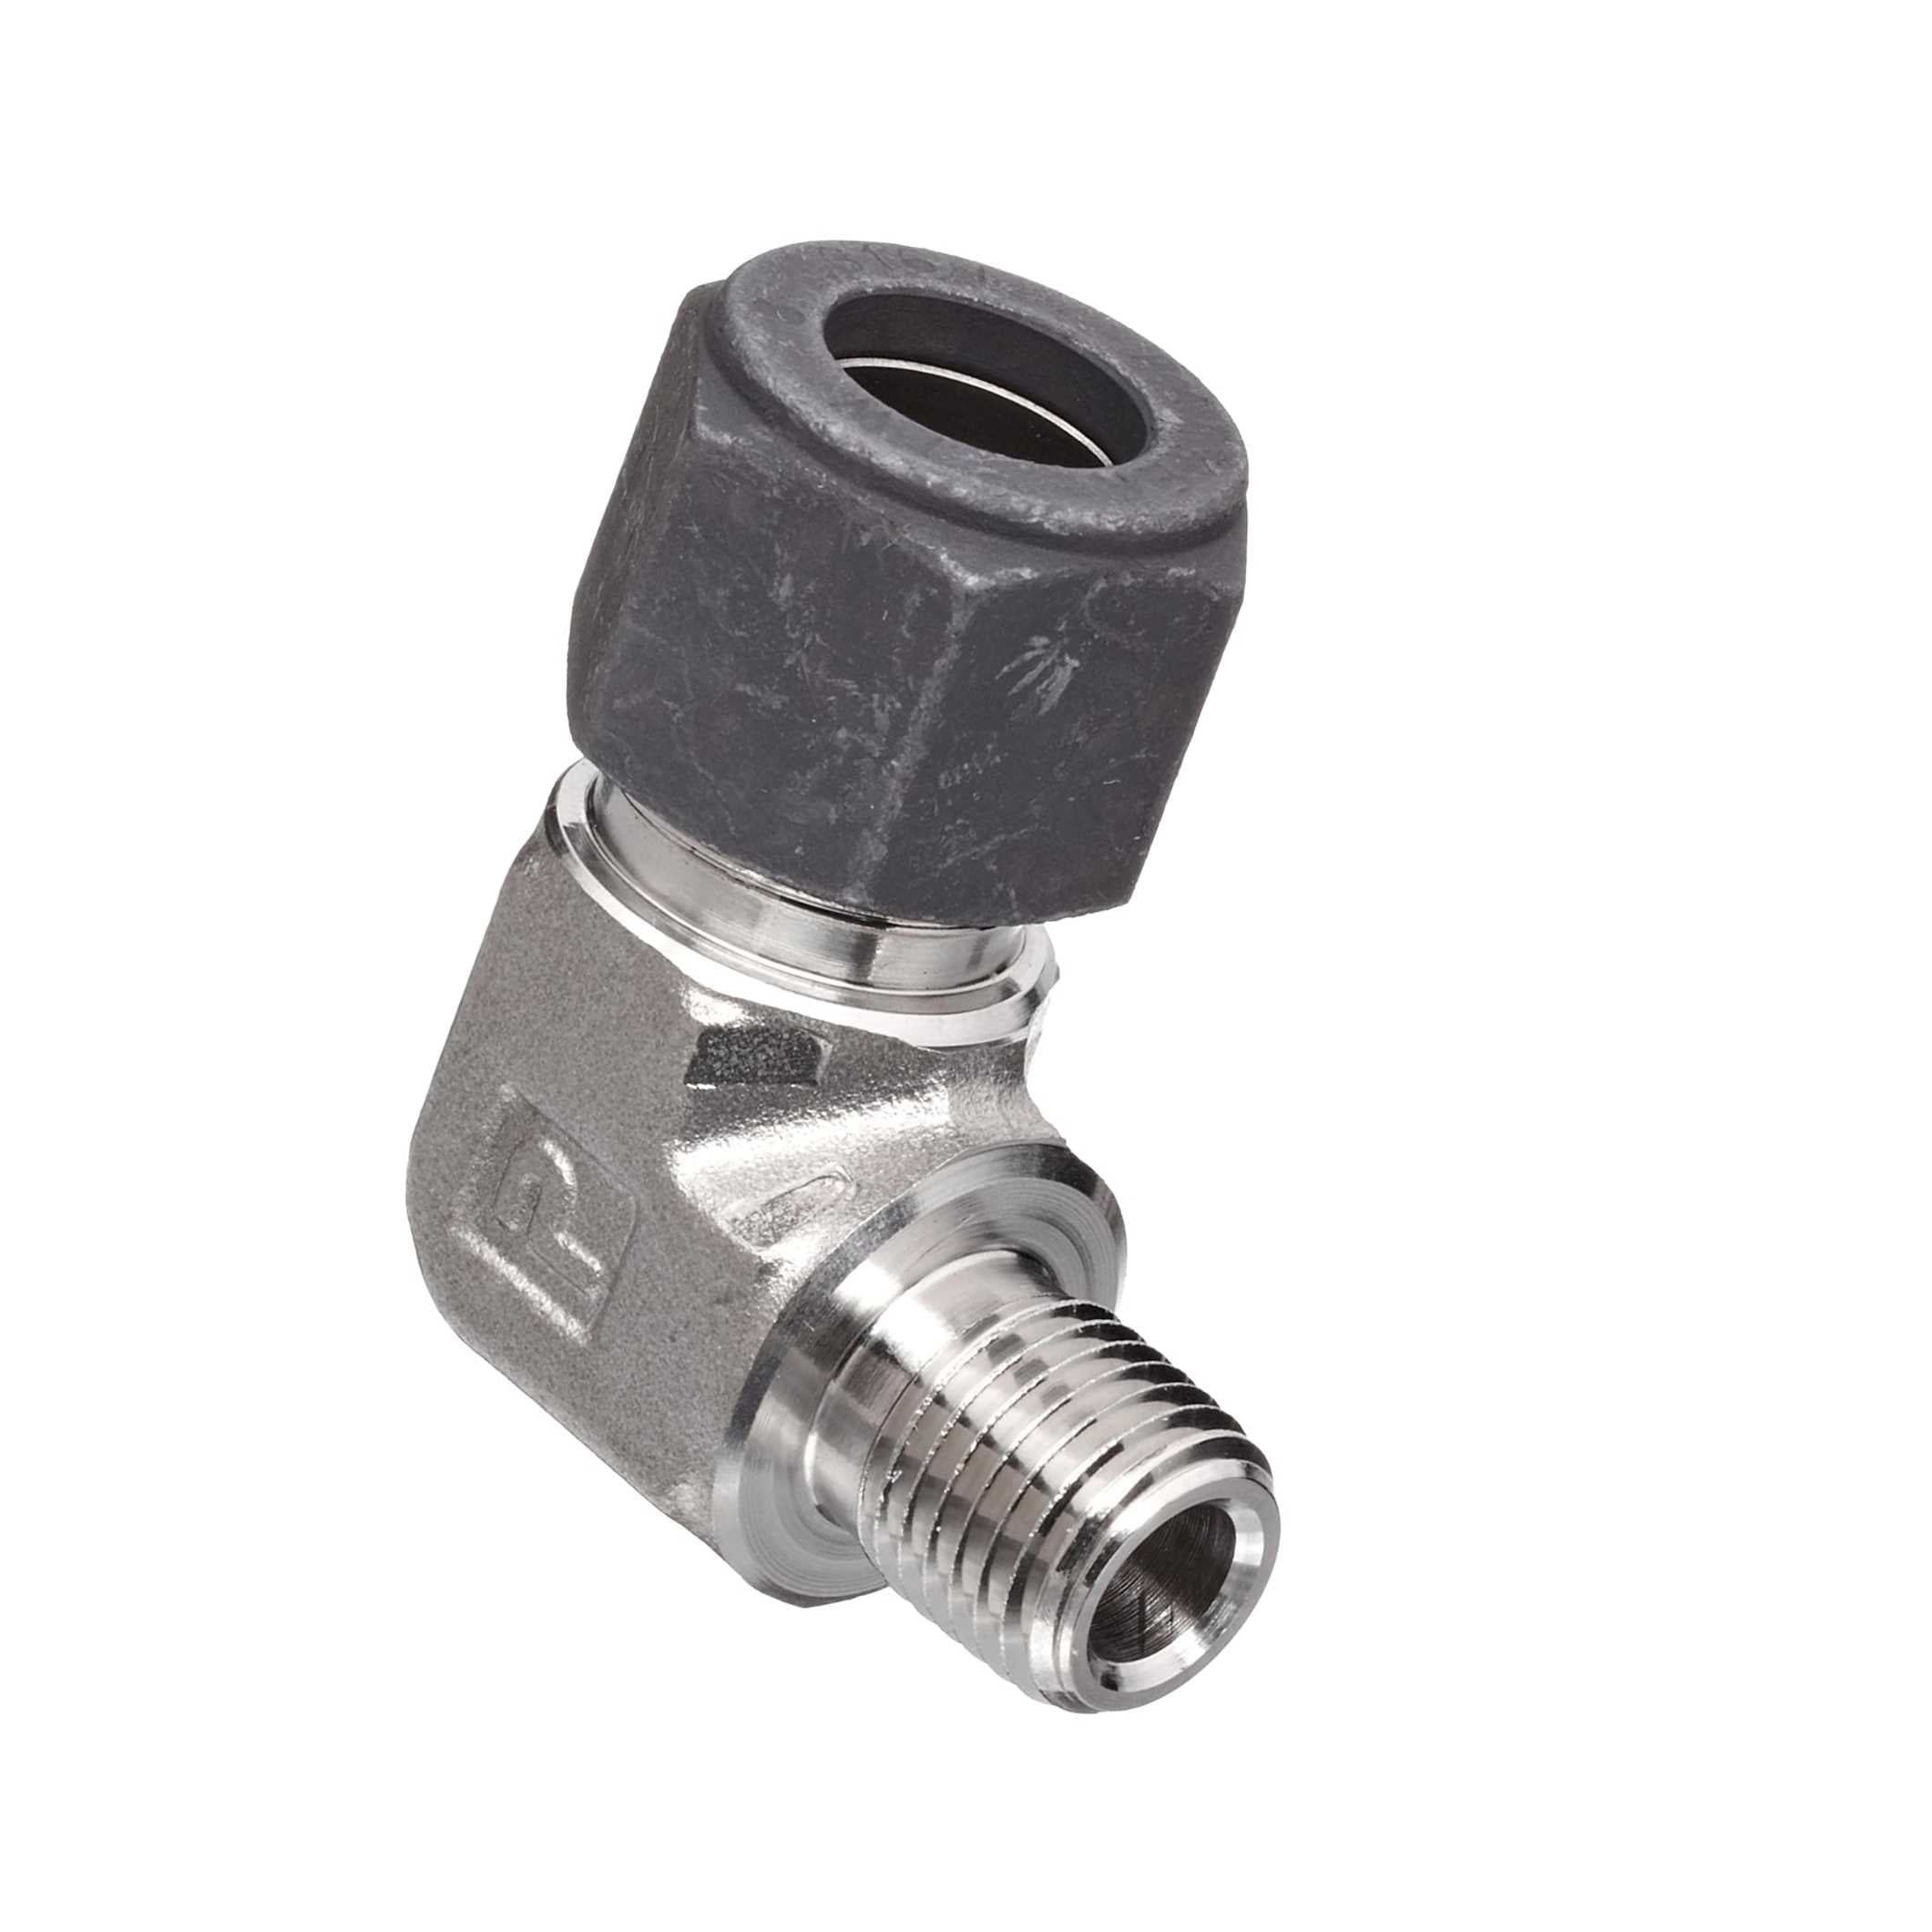 90 Degree Elbow Parker CPI 8-4 CBZ-SS 316 Stainless Steel Compression Tube Fitting 1/2 Tube OD x 1/4 NPT Male